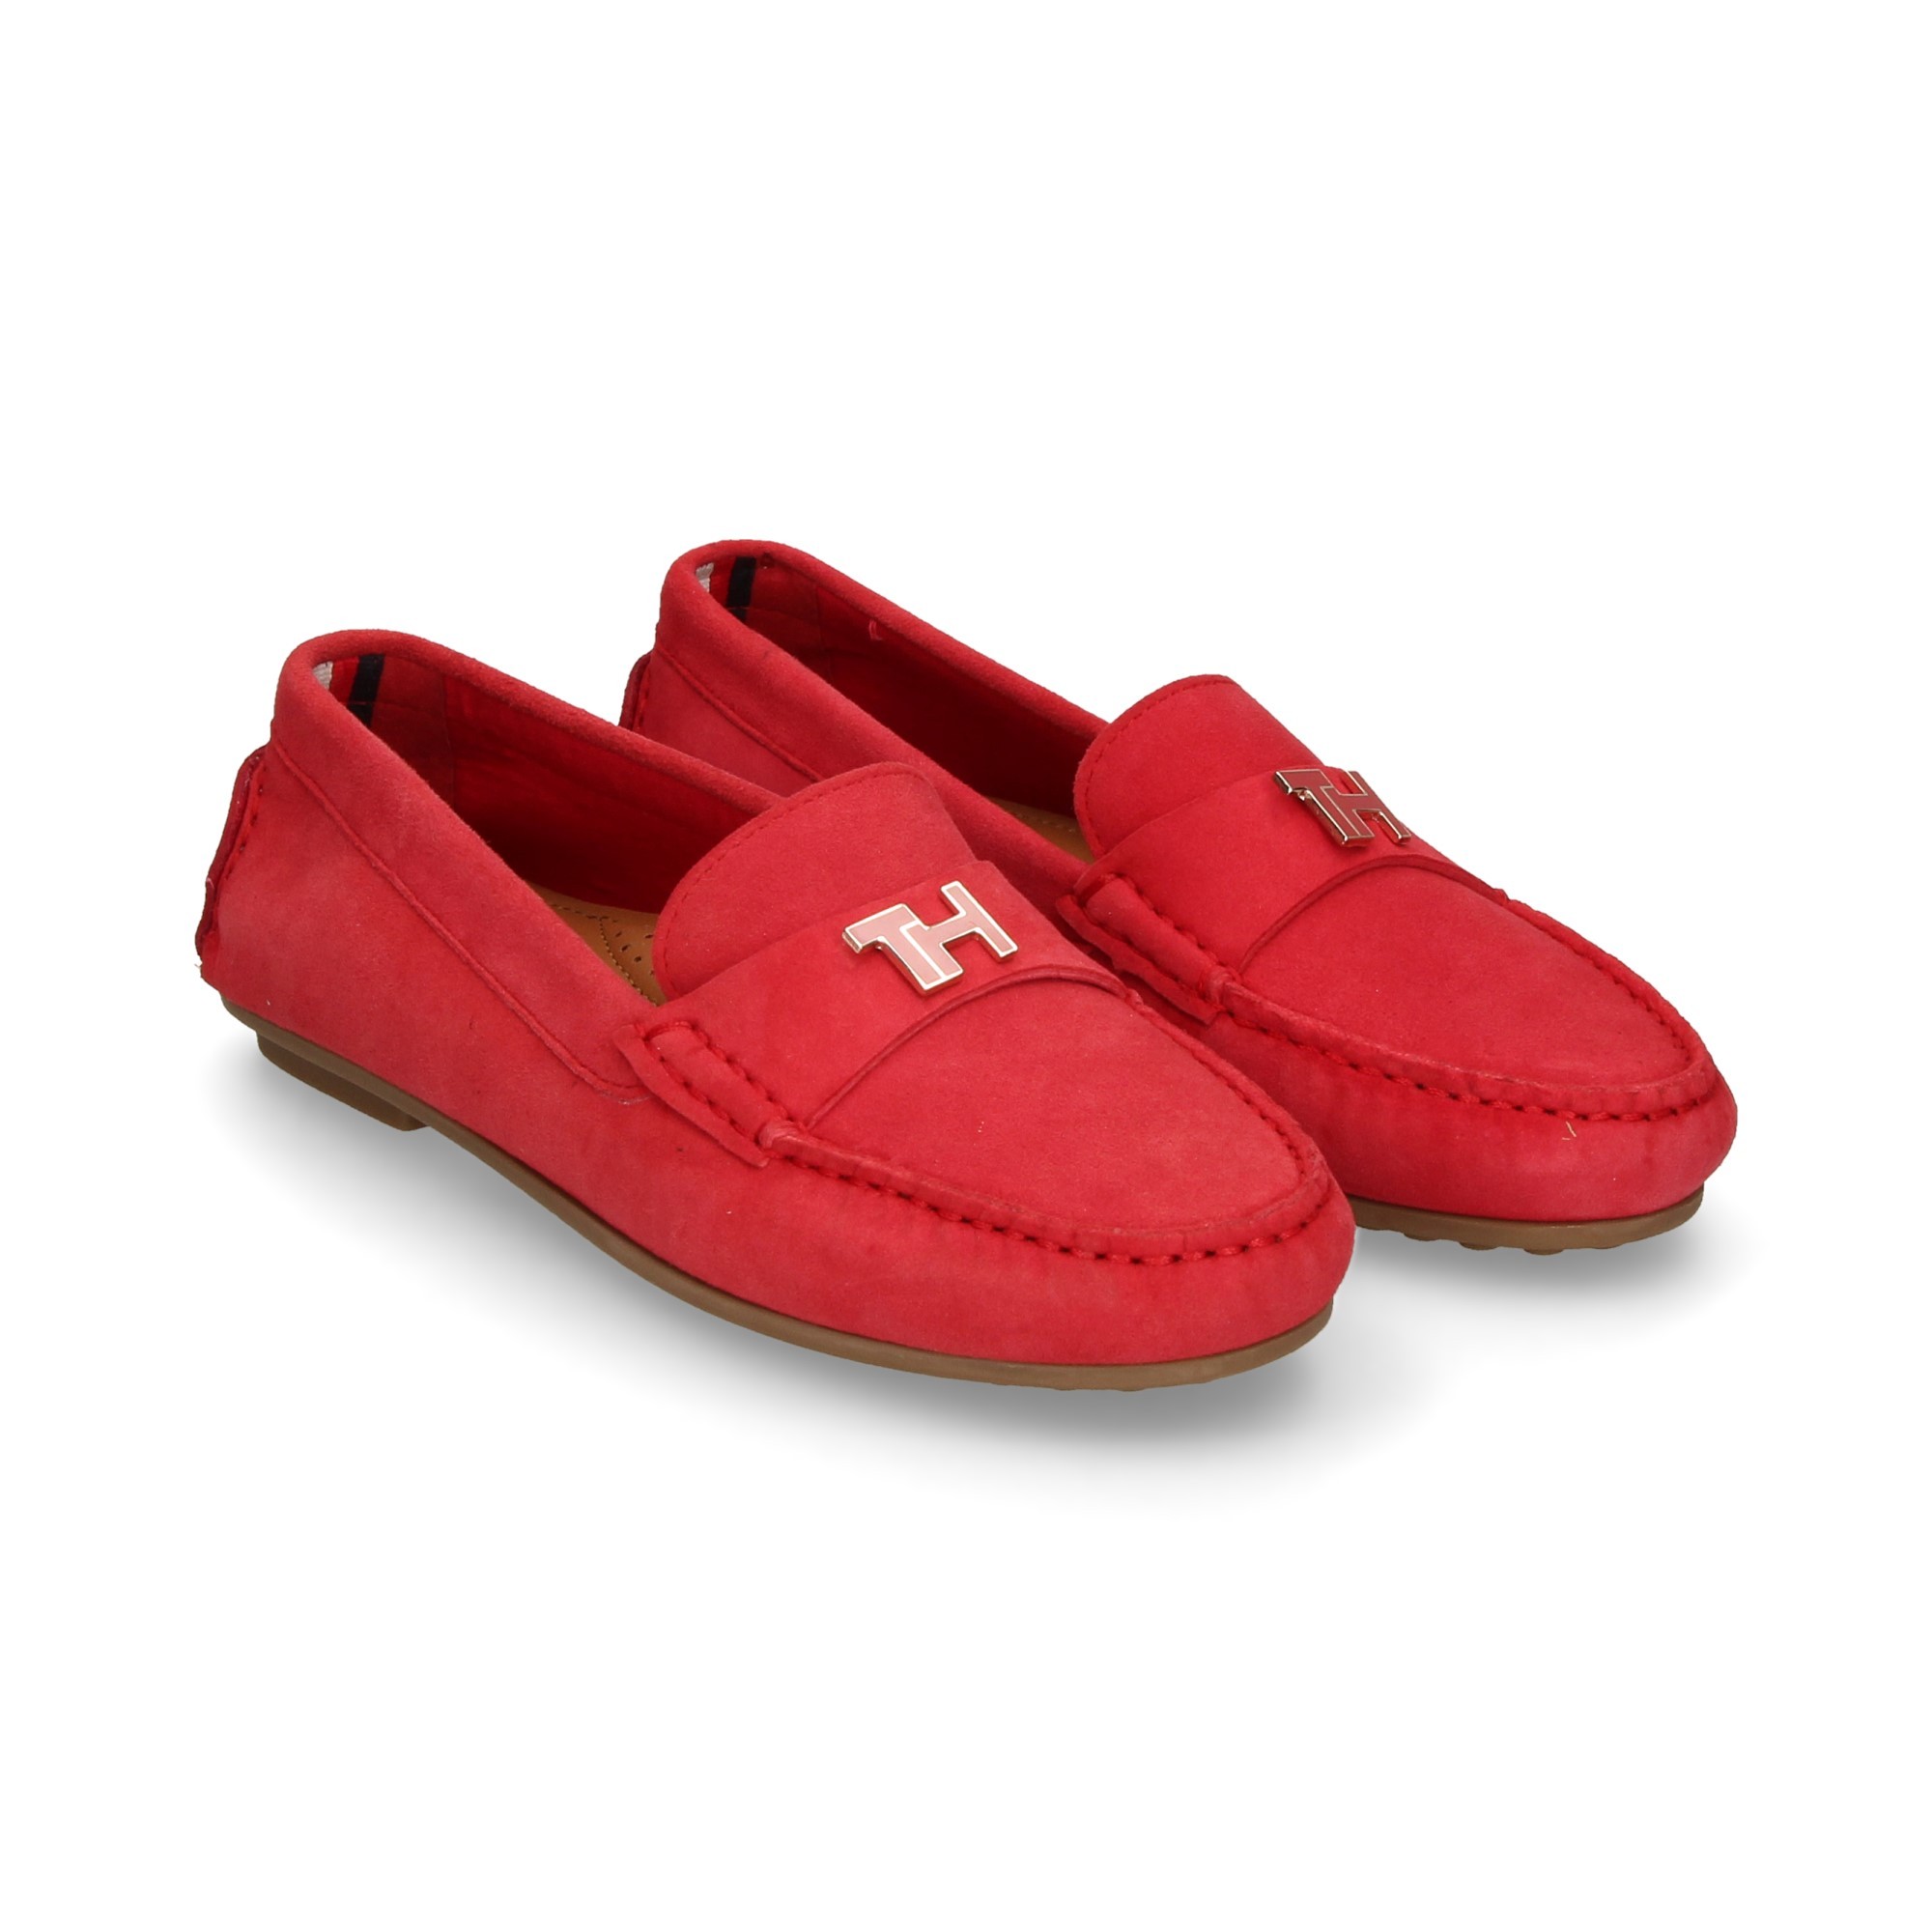 moccasin-adorned-suede-rot